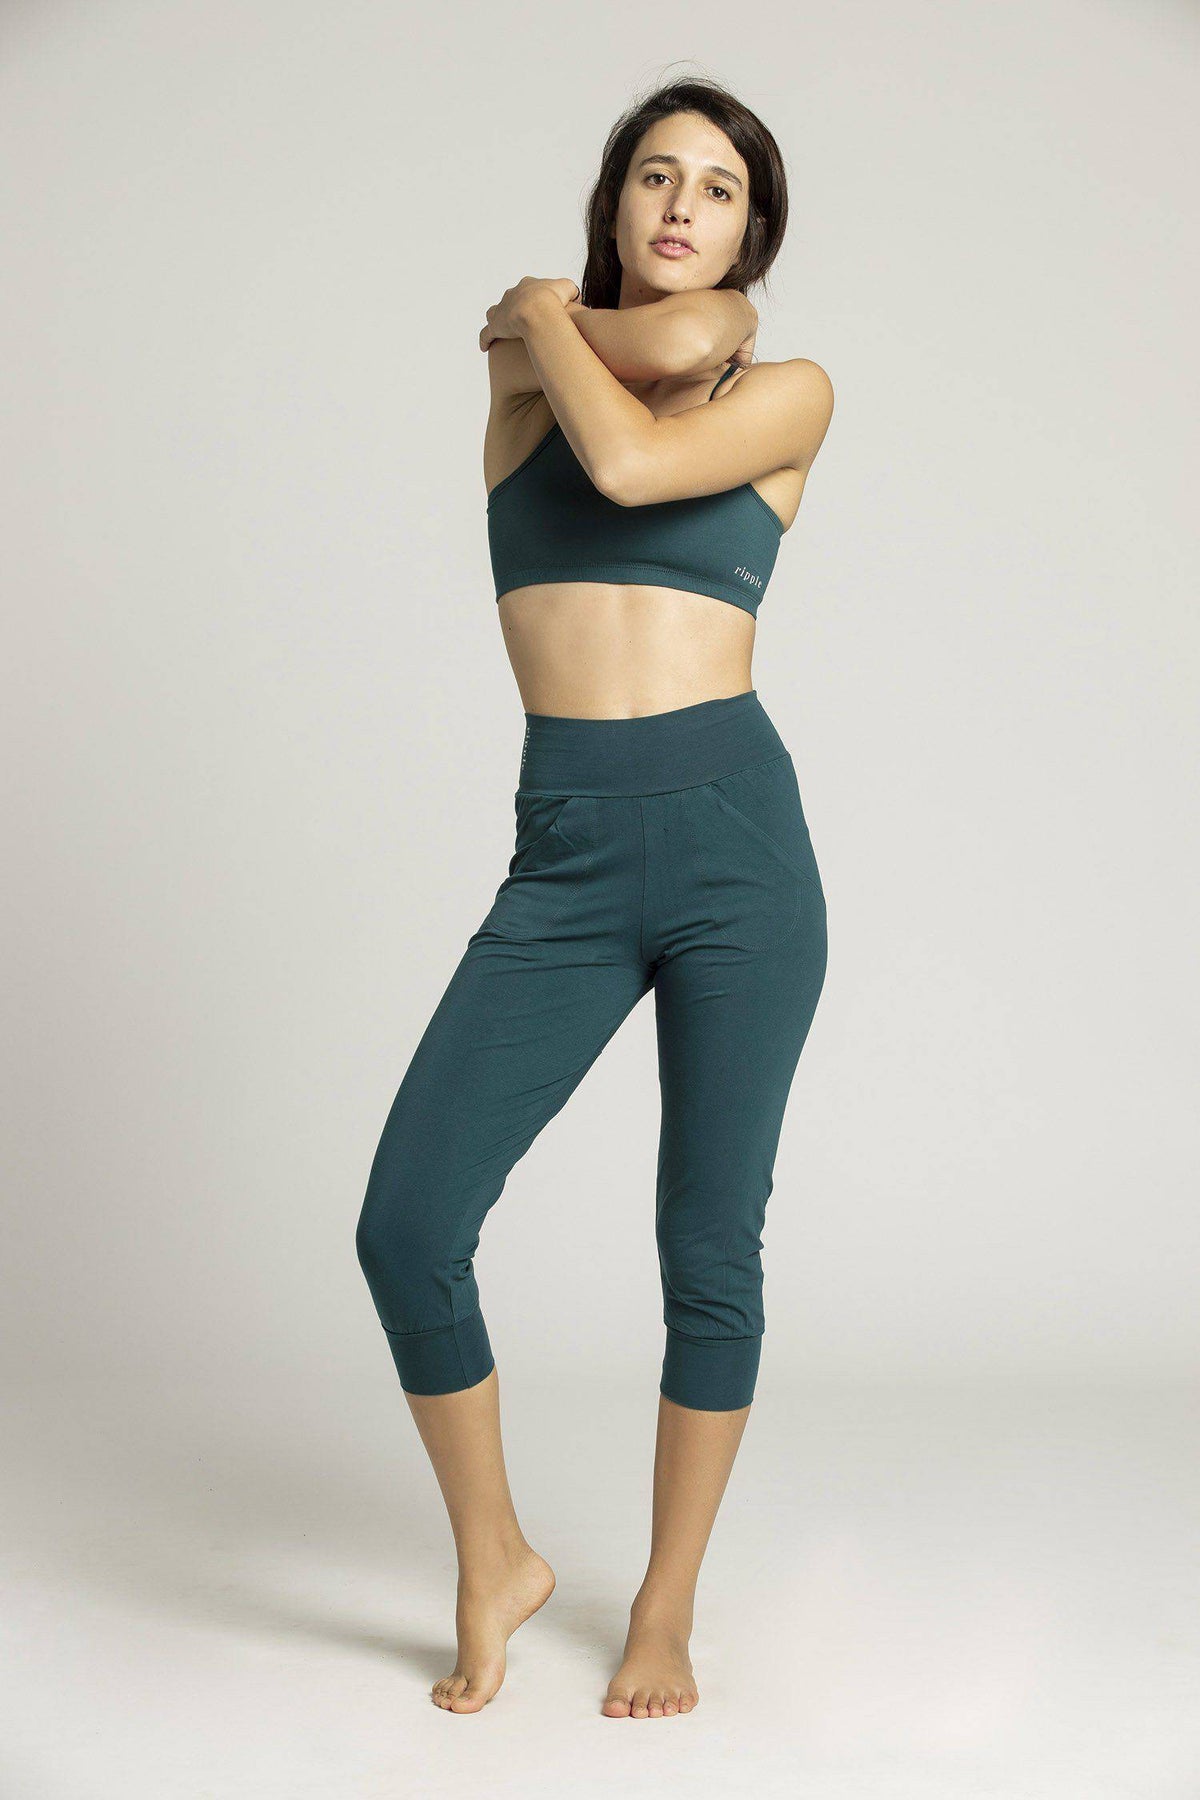 50%off I’mPerfect Organic Cotton Slouchy Capri Pants was 25%off